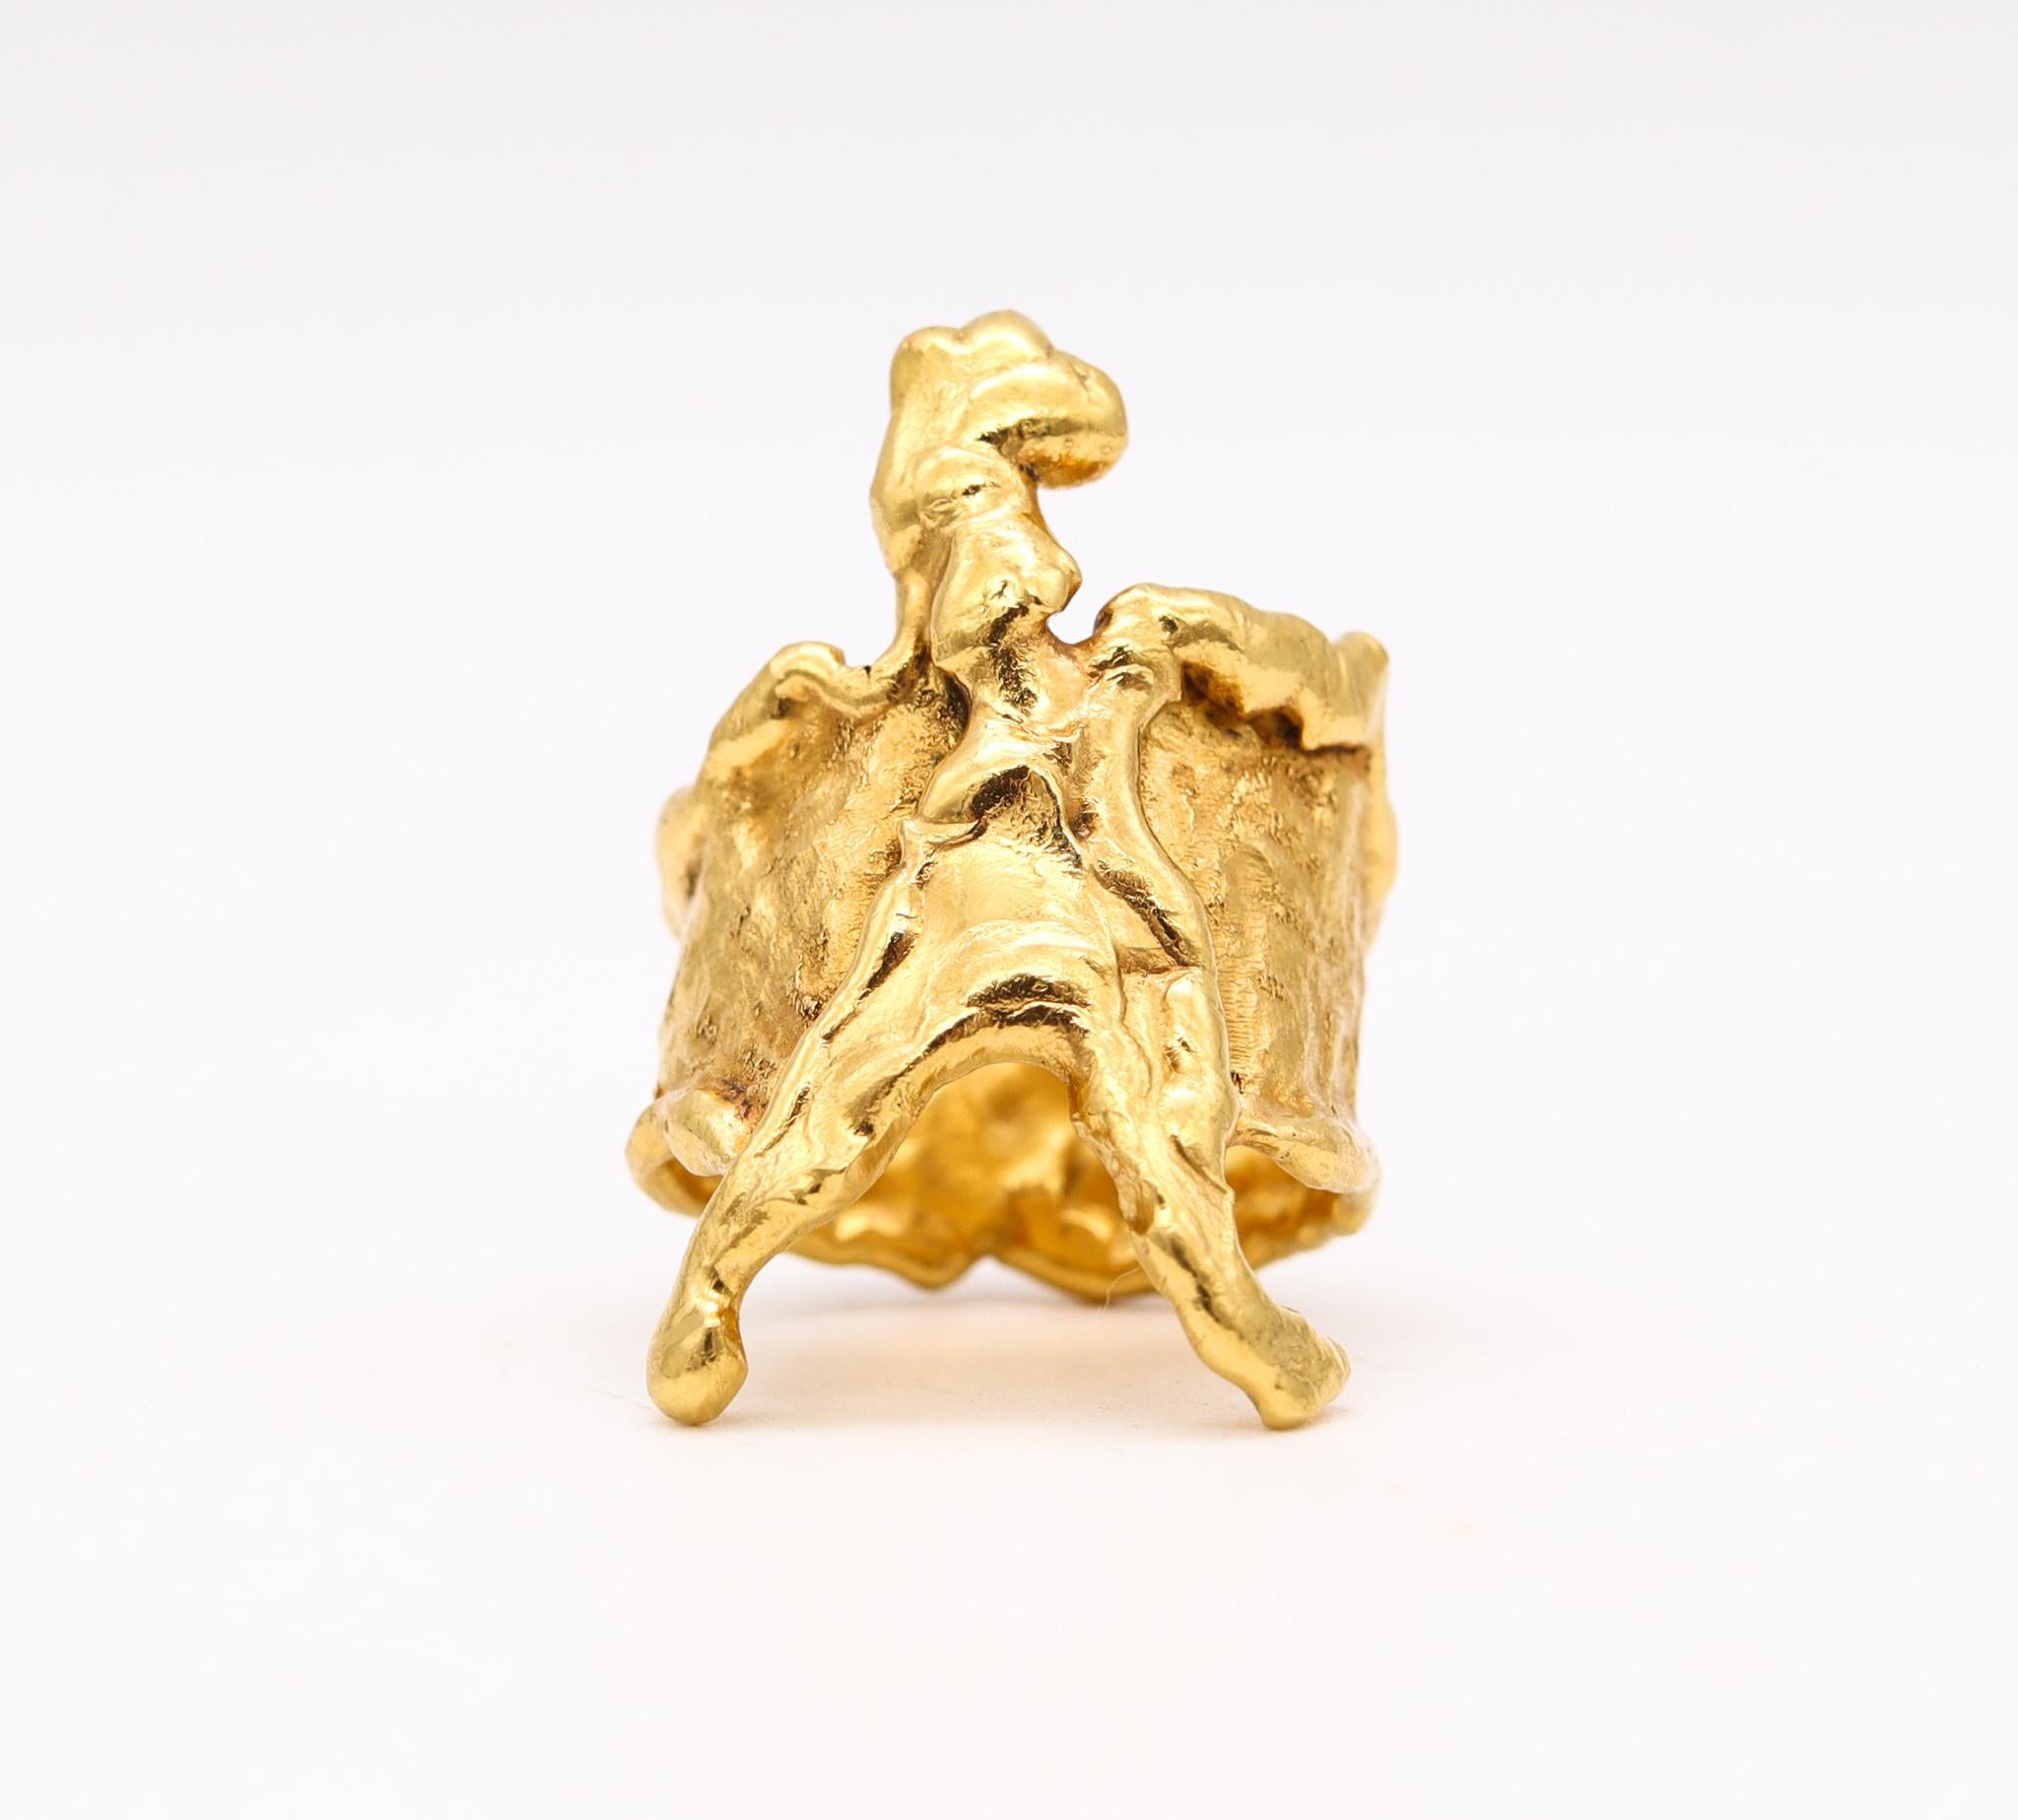 Cocktail ring designed by Jean Mahie.

An incredible piece of wearable art, created in Paris France by the artist and goldsmith Jean Mahie, back in the 1980. This little sculpture has been crafted in solid rich yellow gold of 22 karats with the